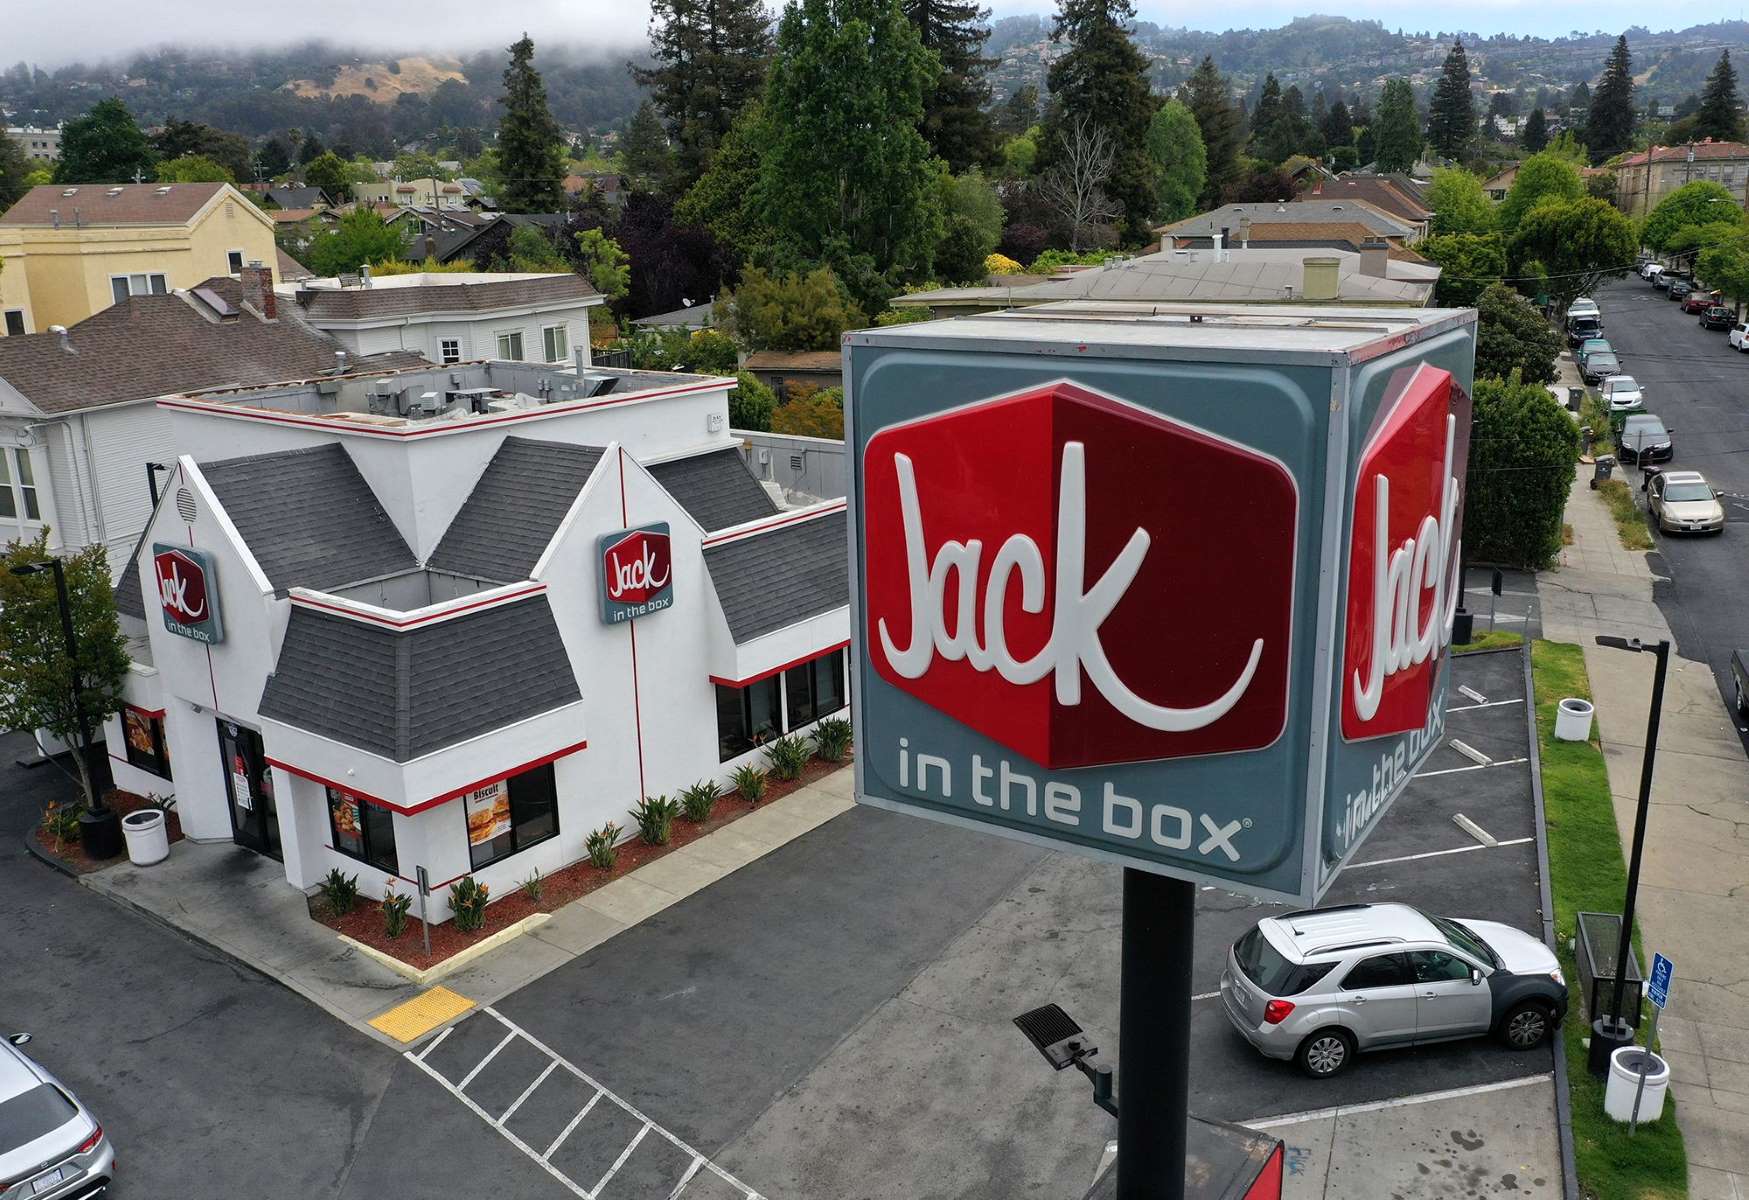 jack-in-the-box-employee-fires-gun-at-angry-drive-thru-customer-shocking-incident-caught-on-camera